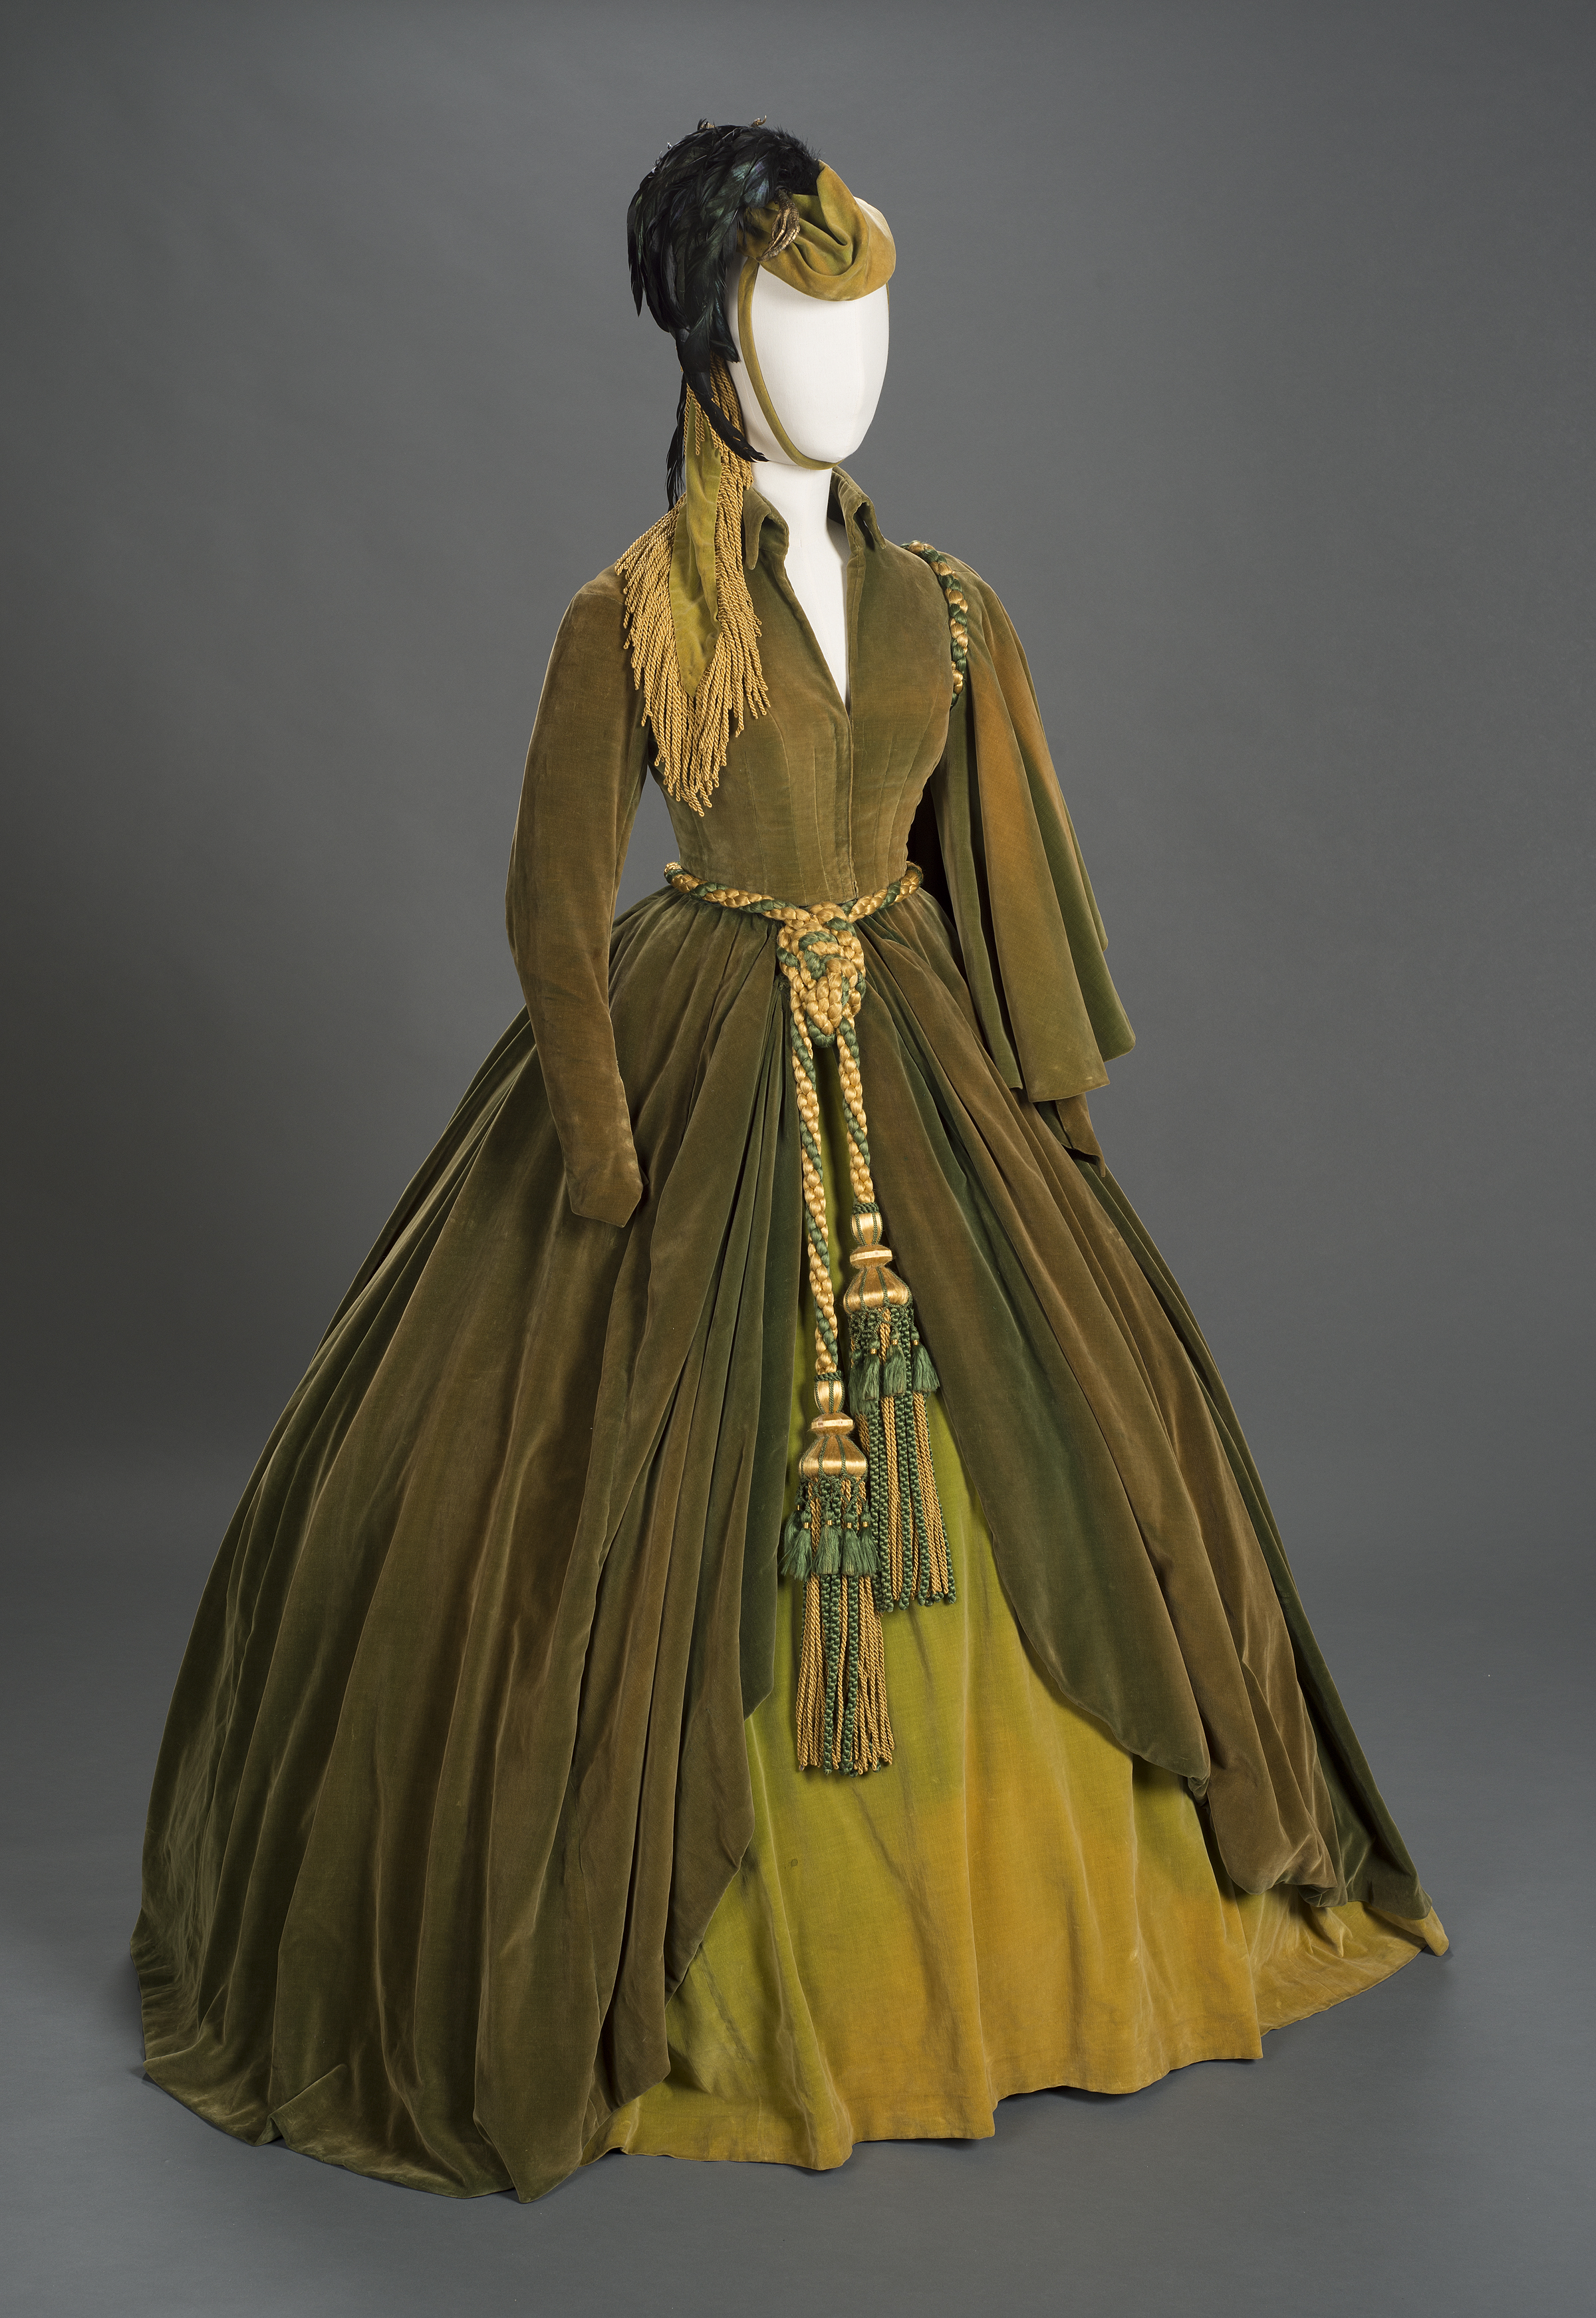 Behind the scenes: Conserving the “Gone With The Wind” dresses